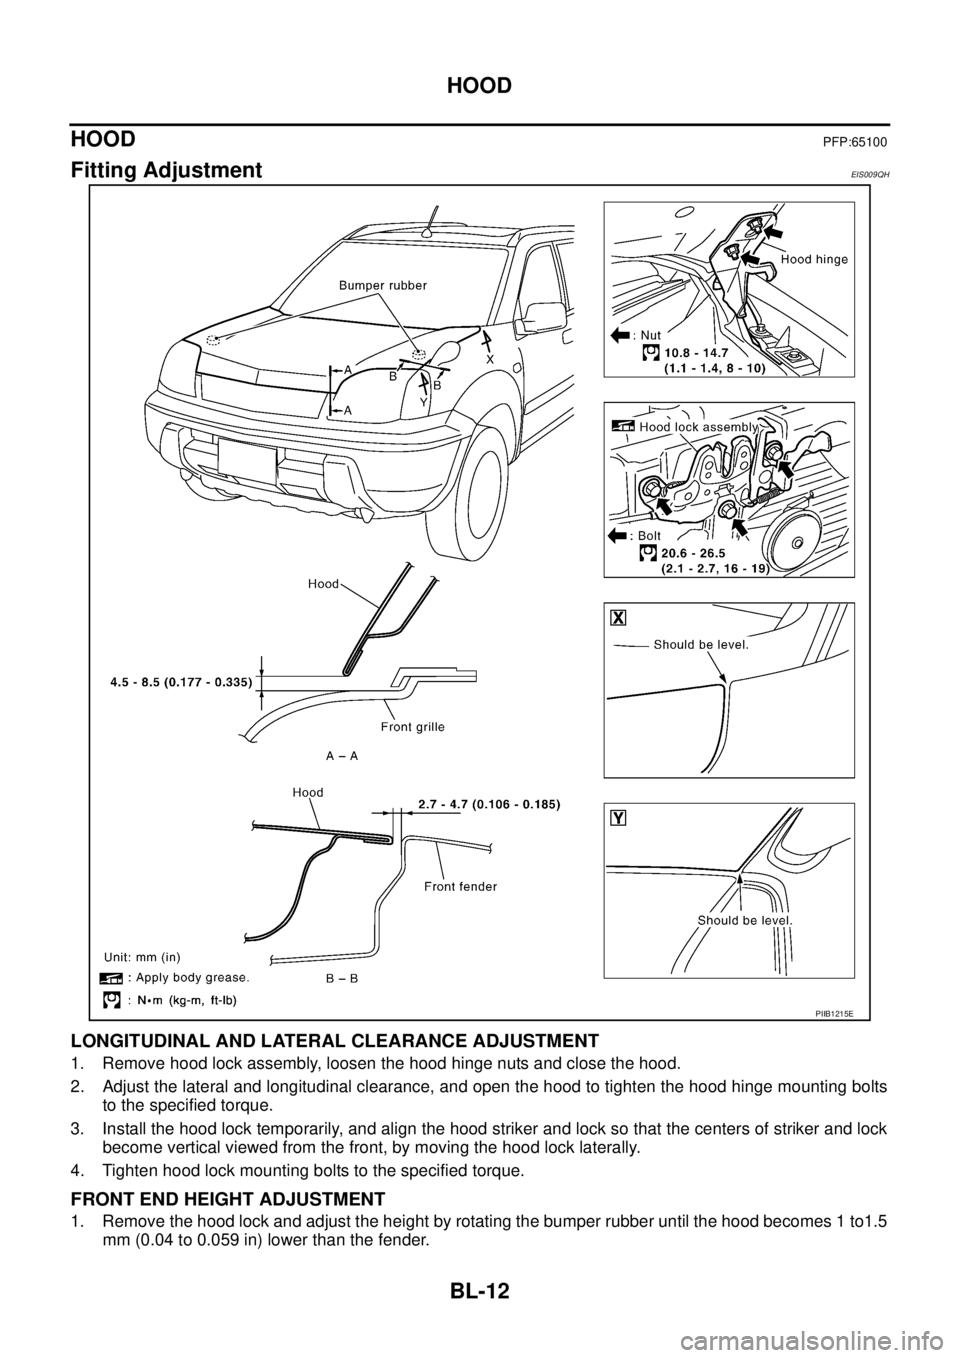 NISSAN X-TRAIL 2003  Service Repair Manual BL-12
HOOD
 
HOODPFP:65100
Fitting AdjustmentEIS009QH
LONGITUDINAL AND LATERAL CLEARANCE ADJUSTMENT
1. Remove hood lock assembly, loosen the hood hinge nuts and close the hood.
2. Adjust the lateral a